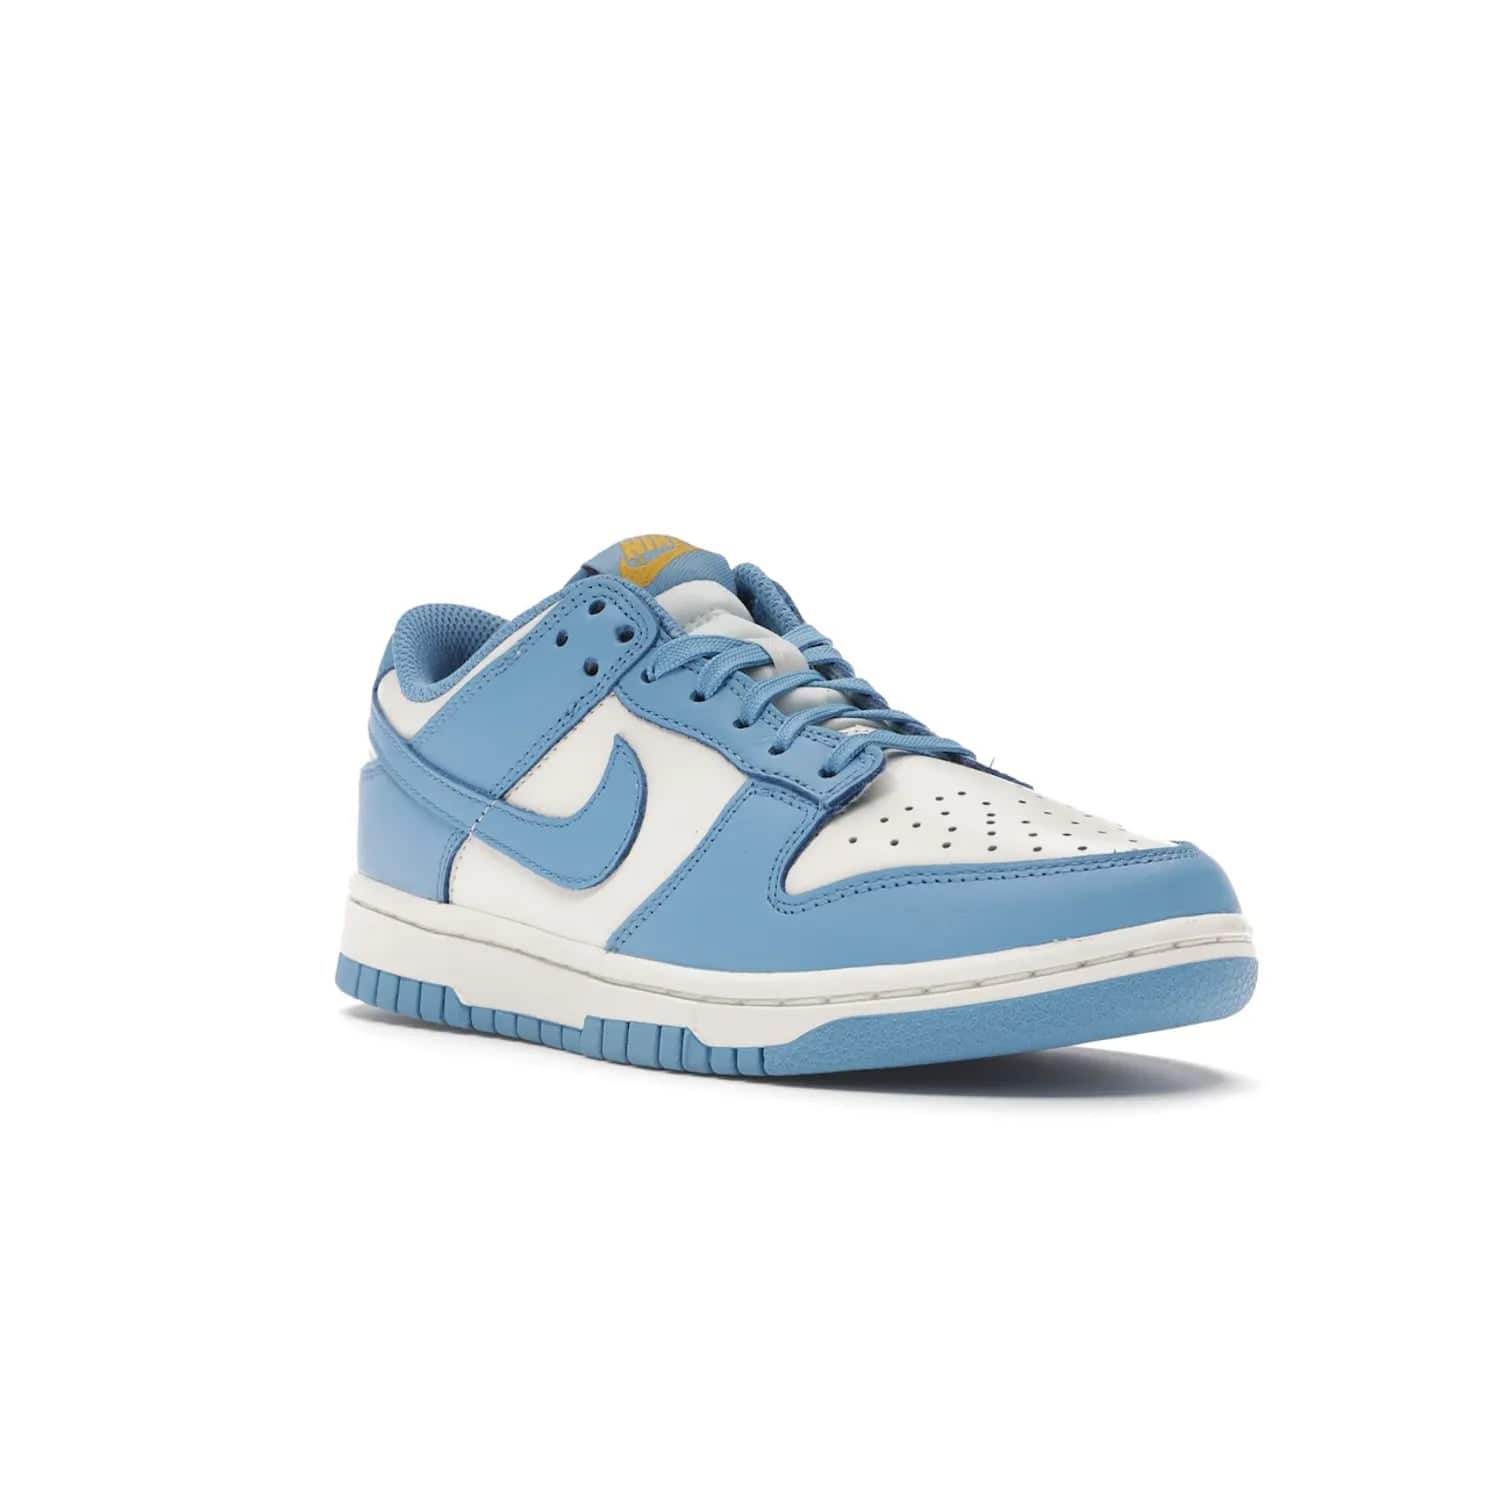 Nike Dunk Low Coast (Women's) - Image 6 - Only at www.BallersClubKickz.com - Iconic UCLA colors honor the west coast with the Nike Dunk Low Coast (Women's), a bold combo of light blue, white and yellow. Light leather upper with white midsole and light EVA outsole offer a modern twist. Released Feb 2021 for $100.